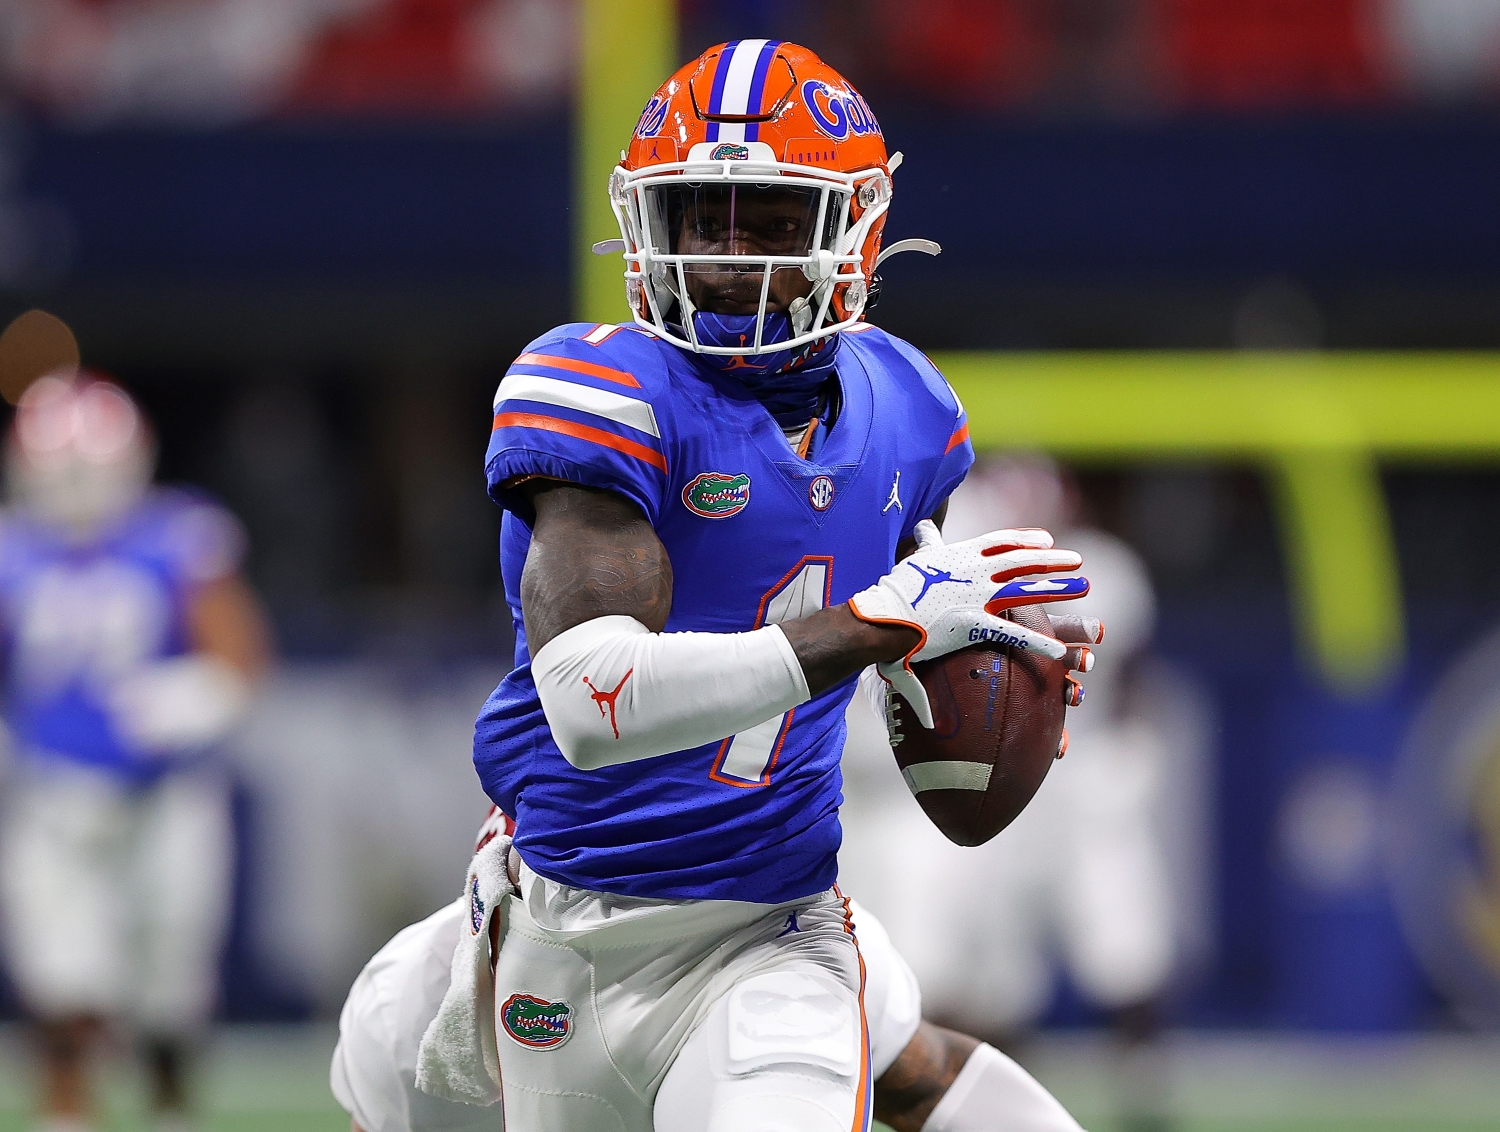 New York Giants first-round pick Kadarius Toney runs with the ball during a game from his college career with the Florida Gators.